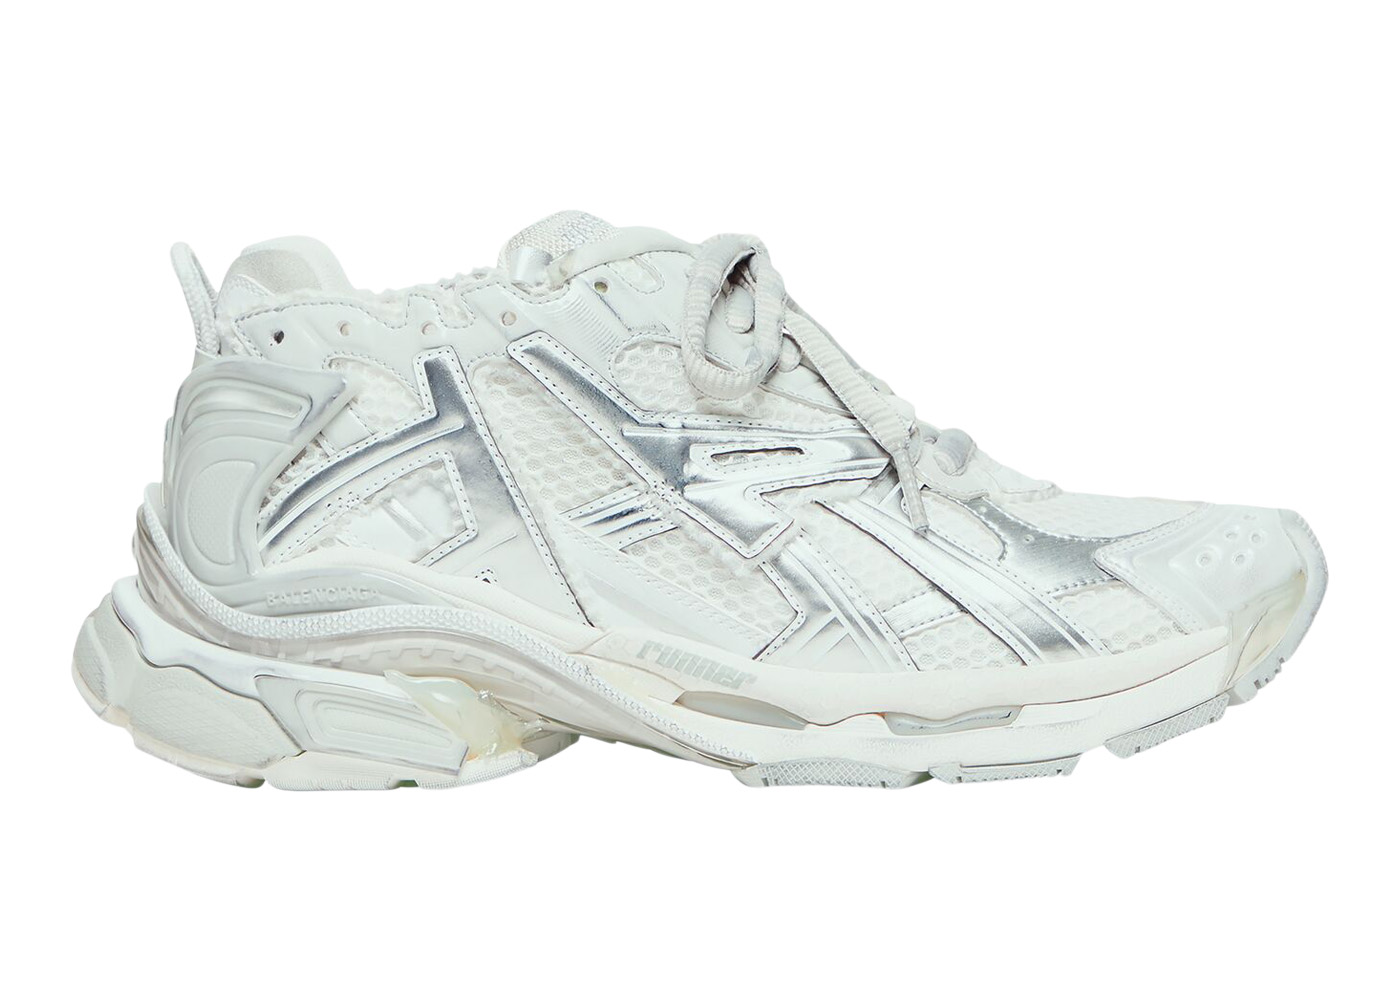 BALENCIAGA Runner logoembroidered leather and mesh sneakers  NETAPORTER